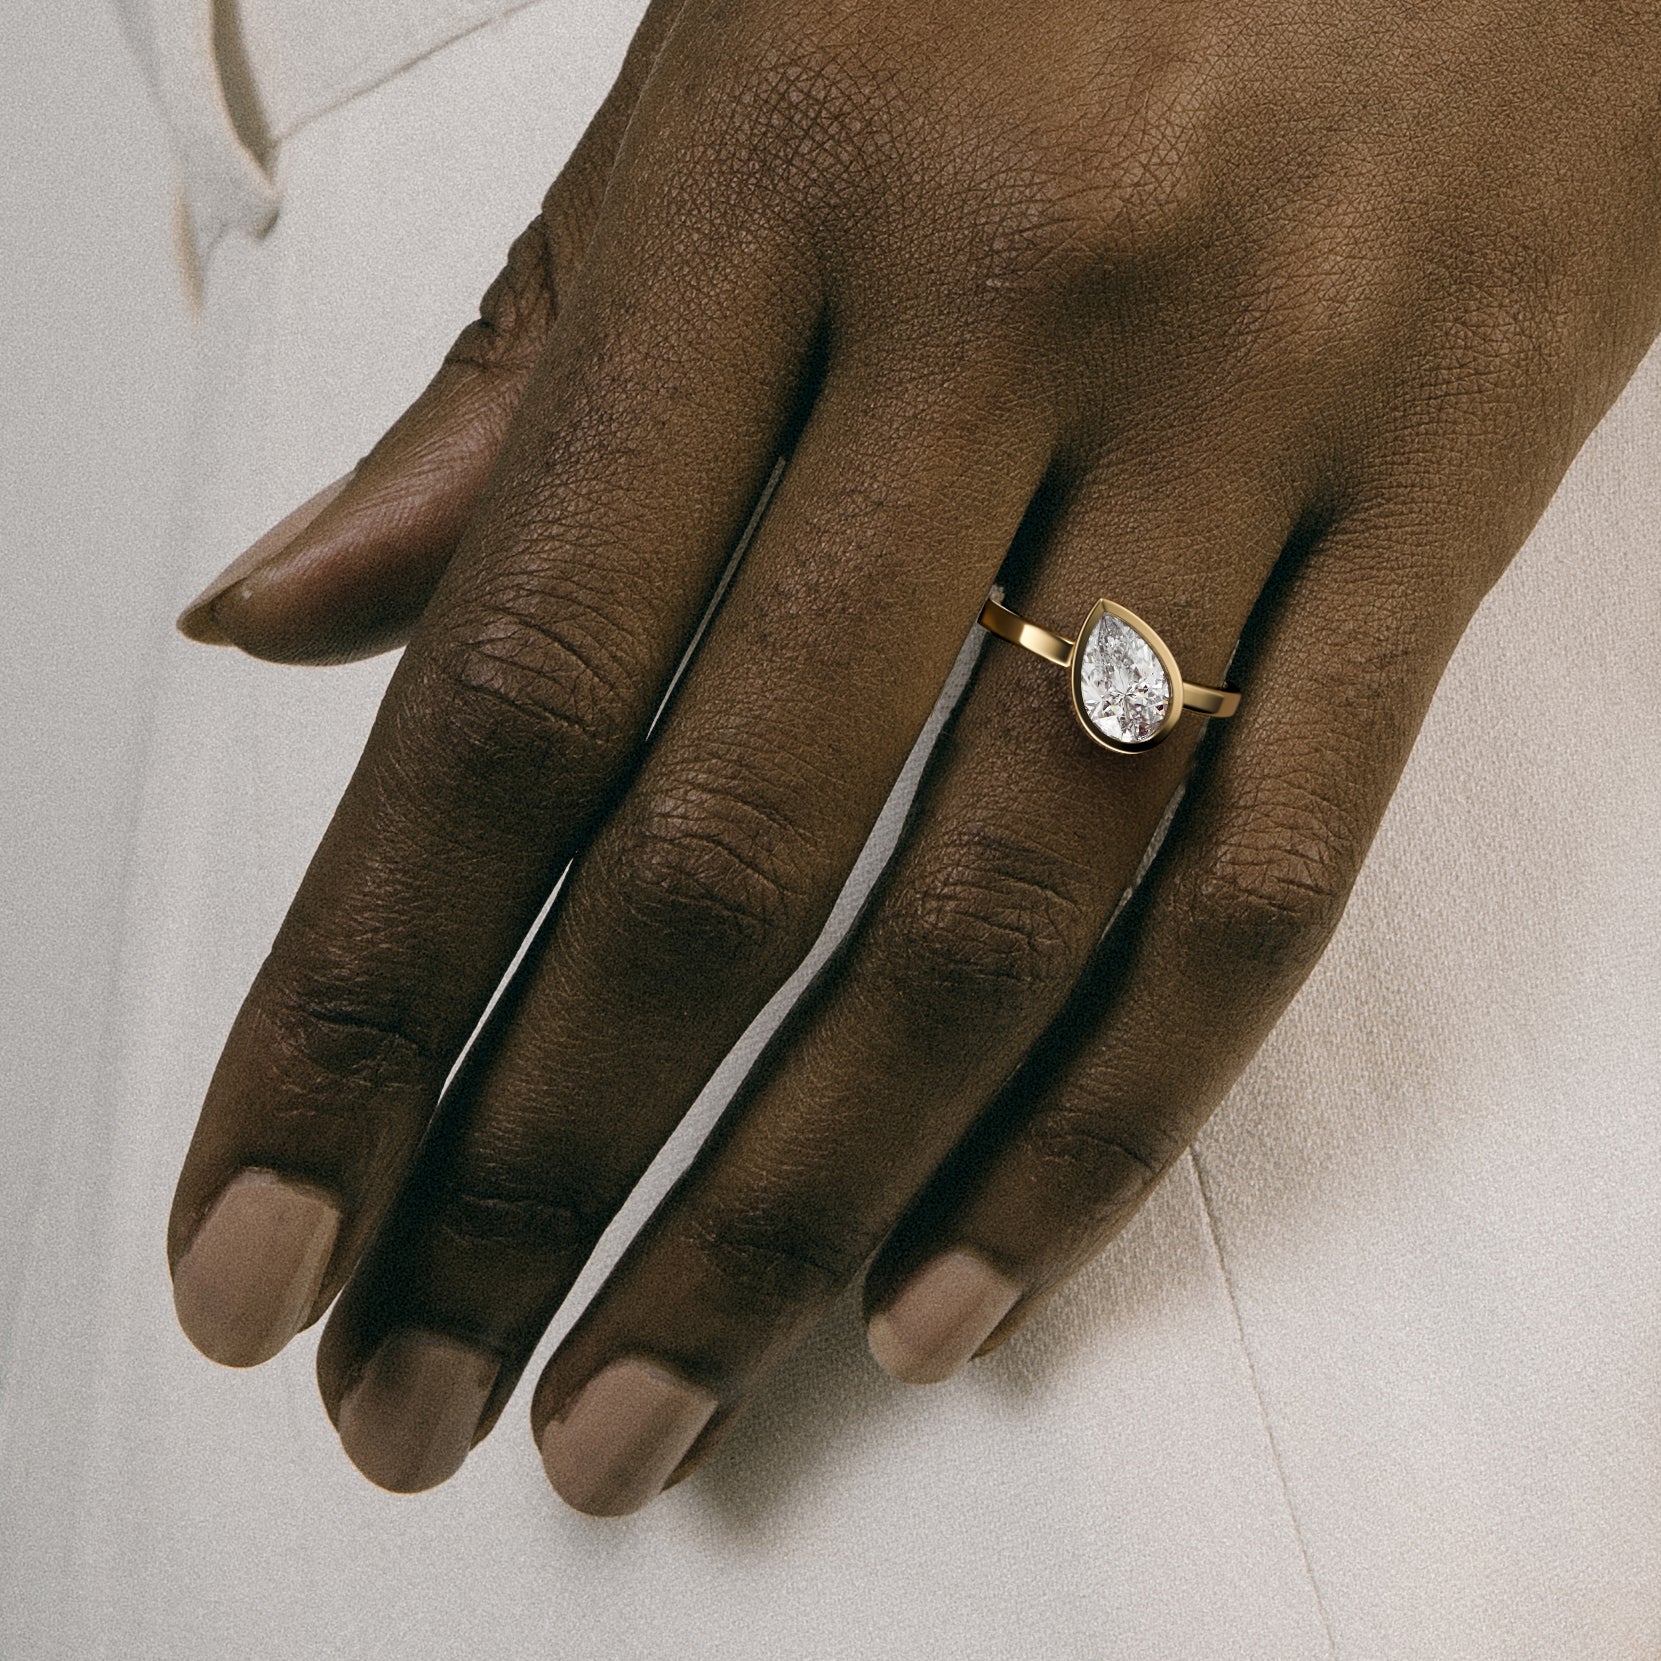 Mana Flat Band with Tilted Pear Unique Wedding Ring Setting in 14k Gold or platinum handmade by SHW Fine Jewelry New York City